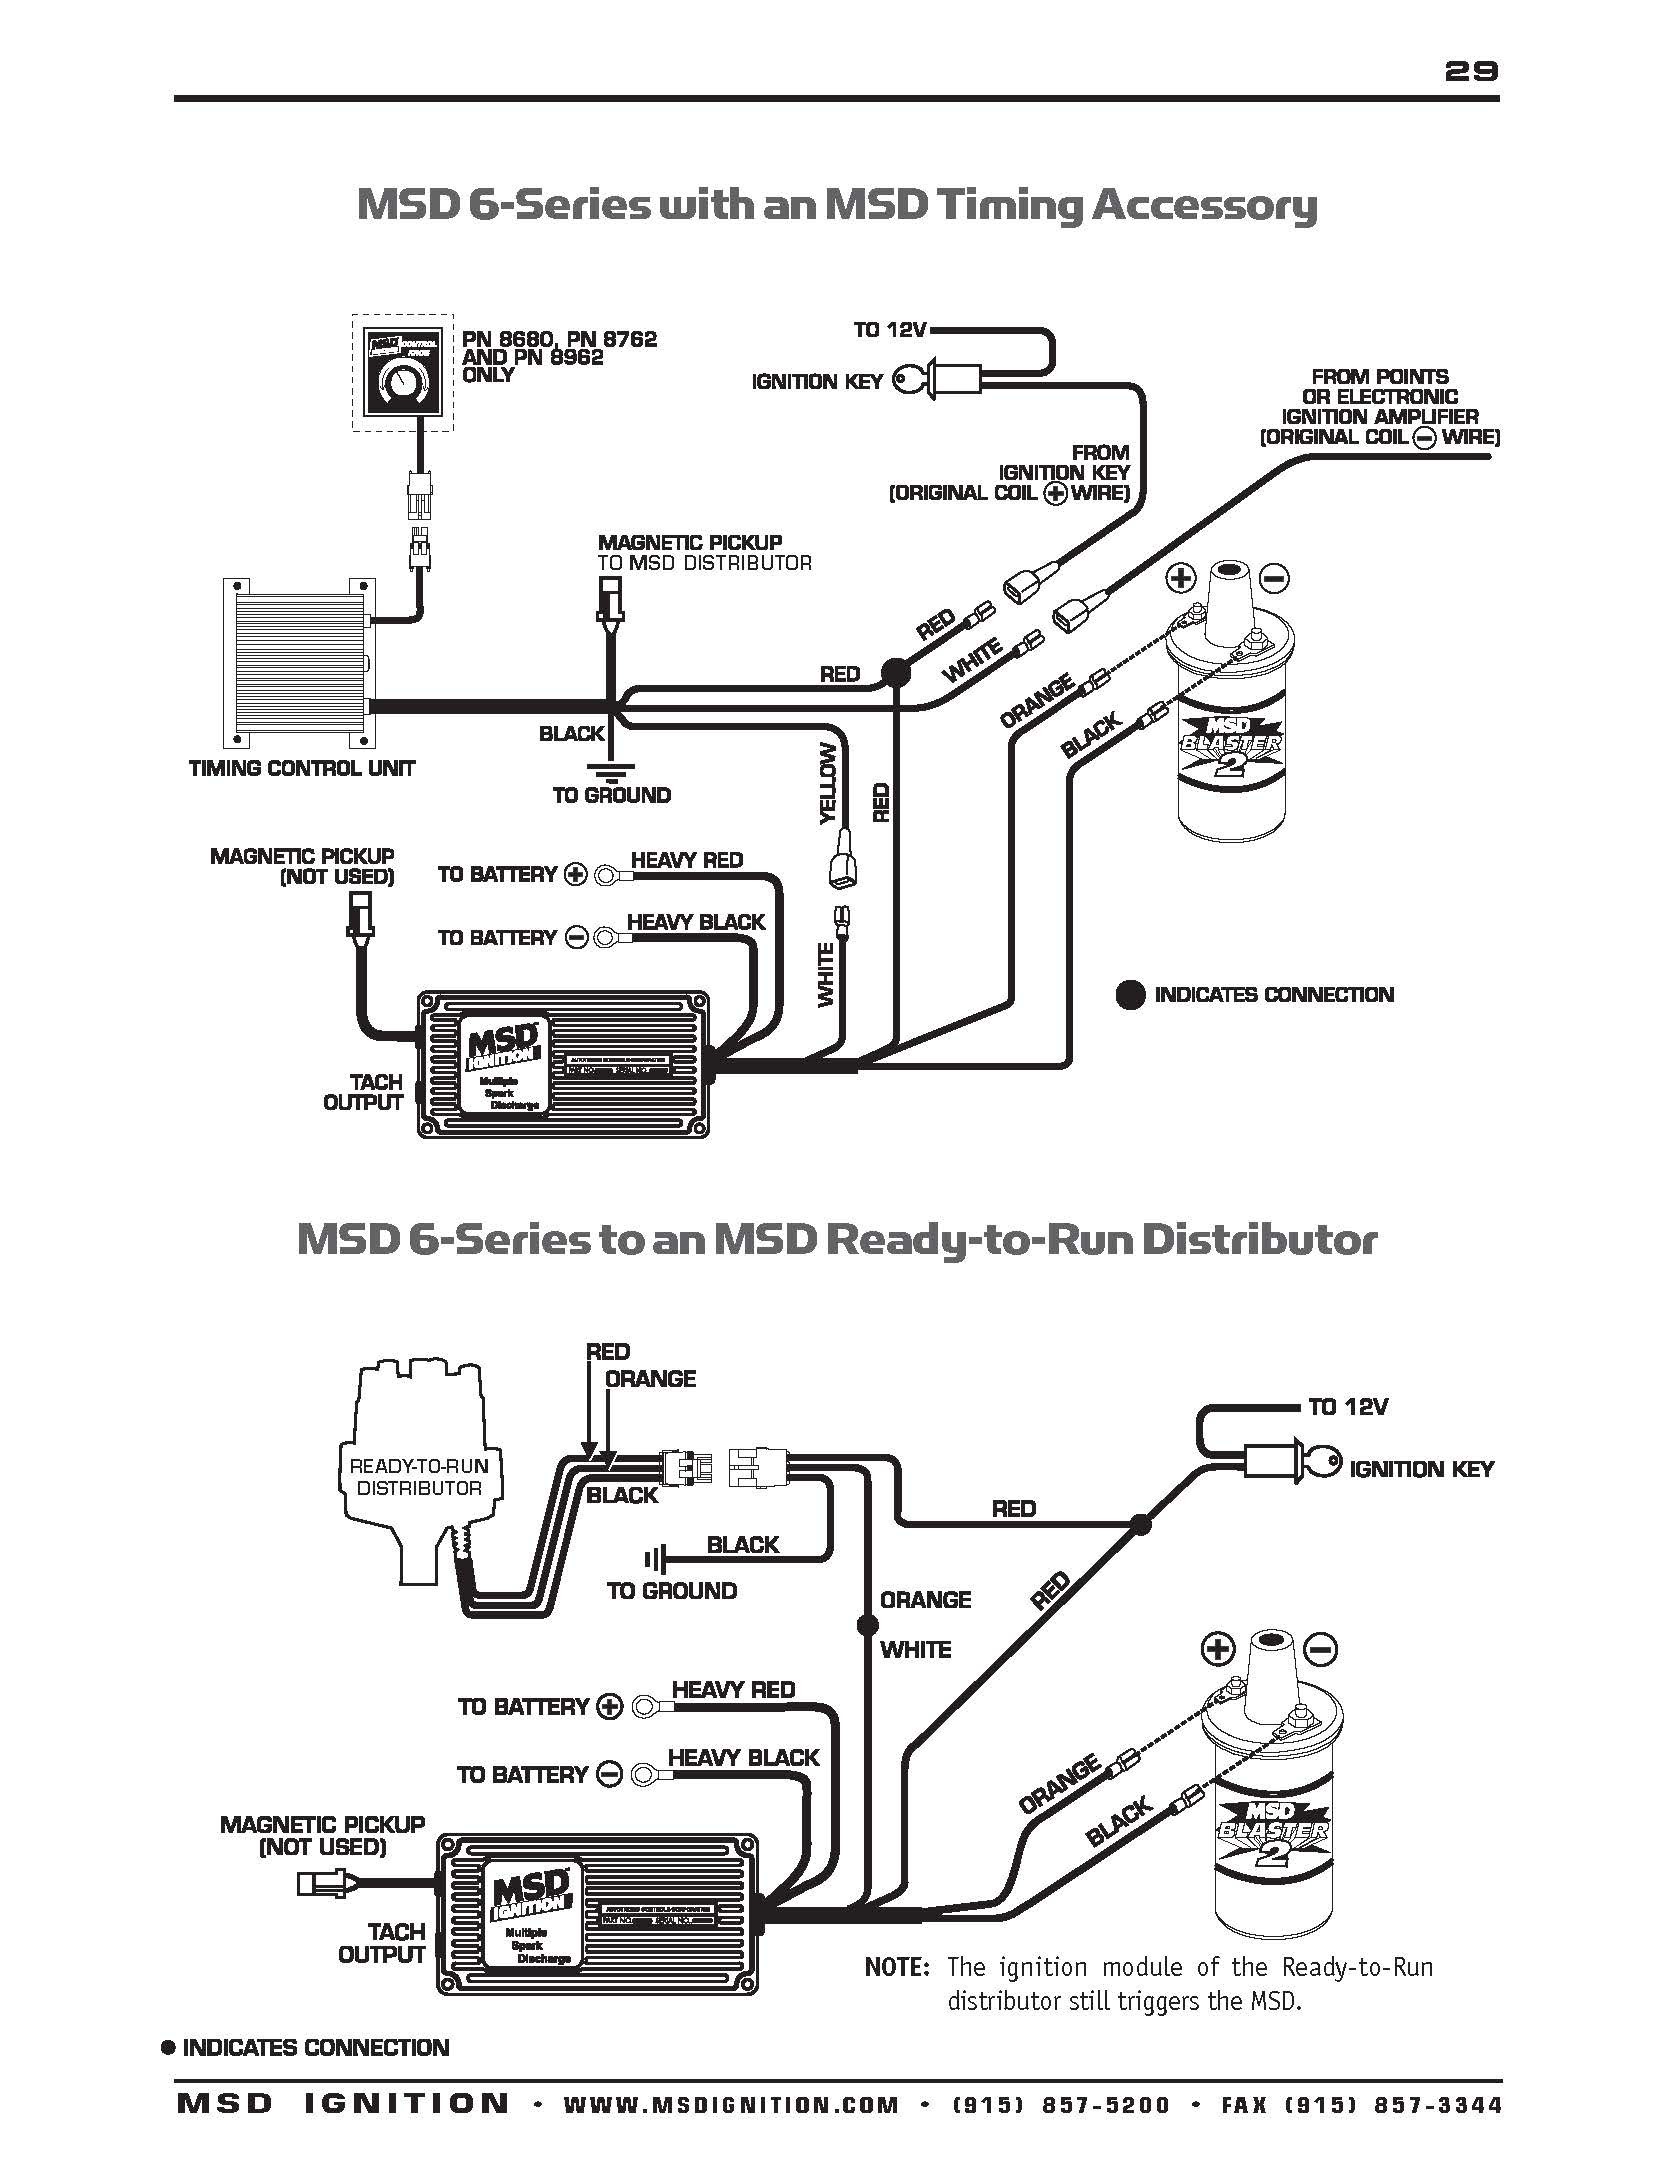 Msd 6al Wiring Diagram Awesome Msd Ignition Wiring Diagrams Brianesser for Msd Distributor Awesome